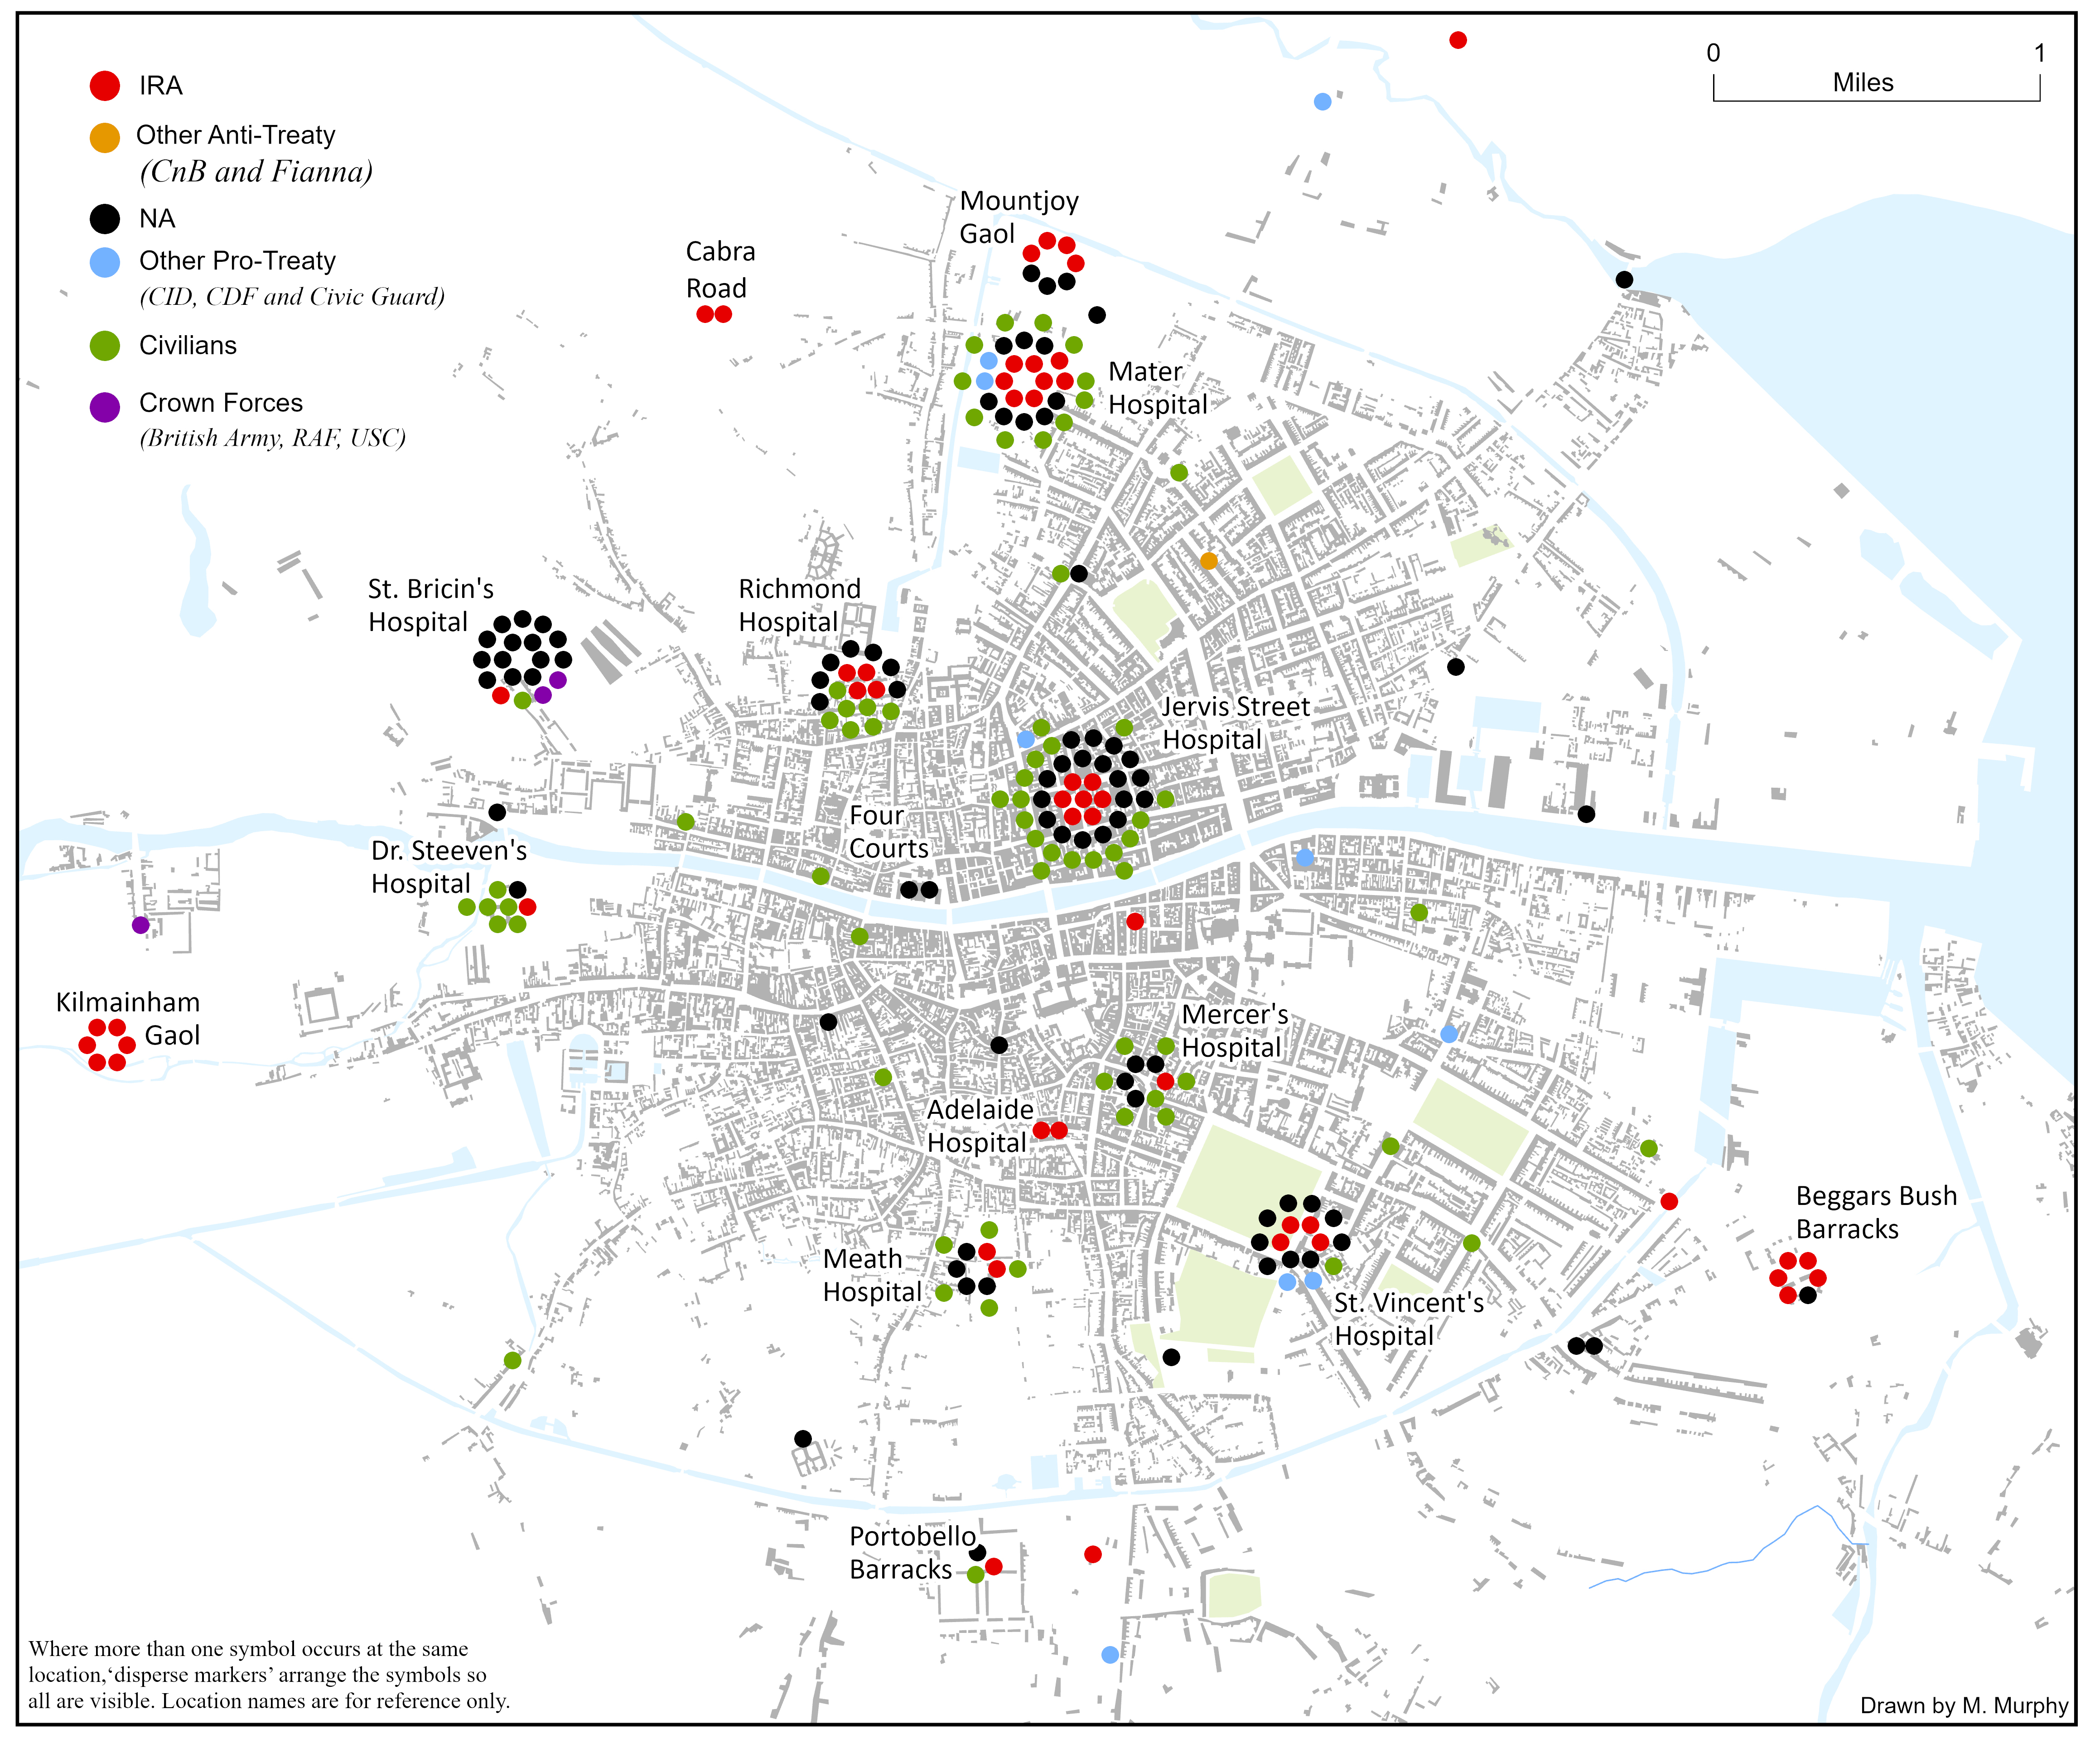 Map showing the location and affiliation of the combatant and civilian fatalities in Dublin City during the Irish Civil War